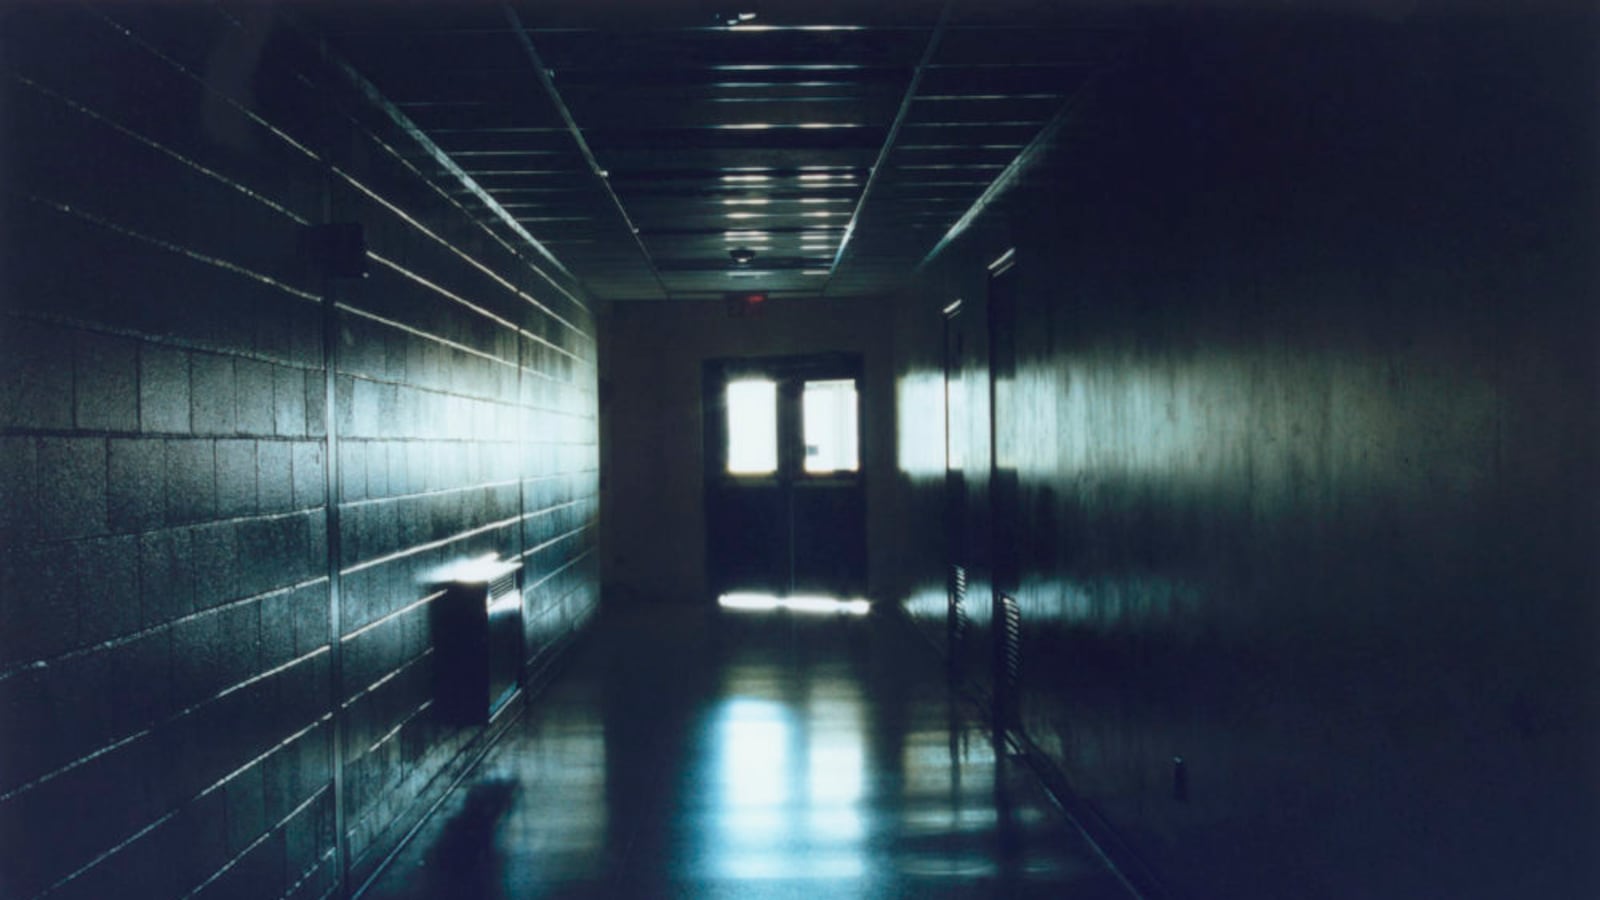 Light comes through a set of double doors at the end of a long, dimly-lit hallway.